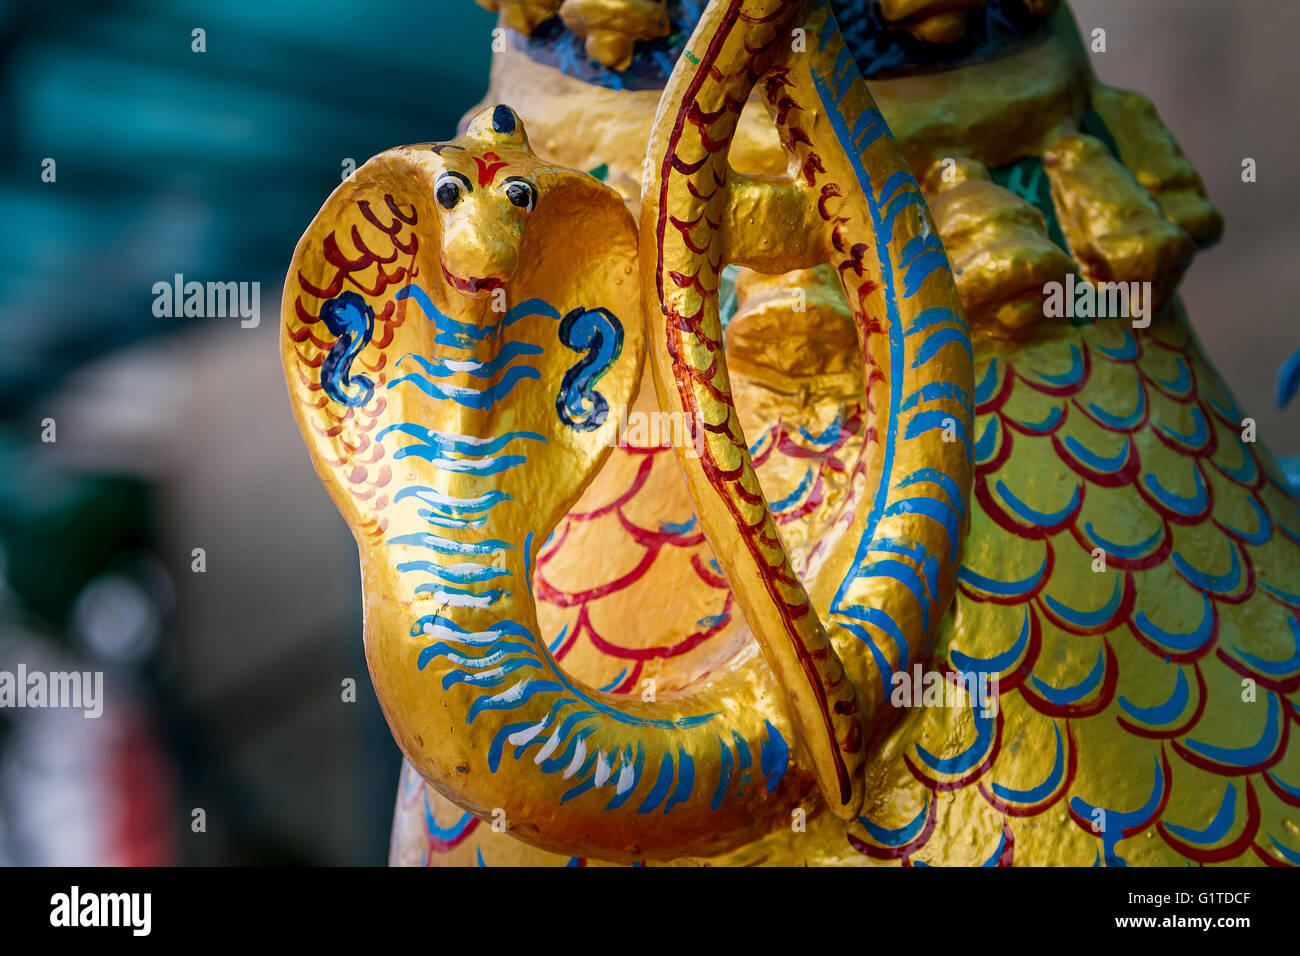 Carving of a Cobra snake wrapped around the neck of a peacock at the Kapaleeshwarar Temple, Mylapore, Chennai, Tamil Nadu, India Stock Photo